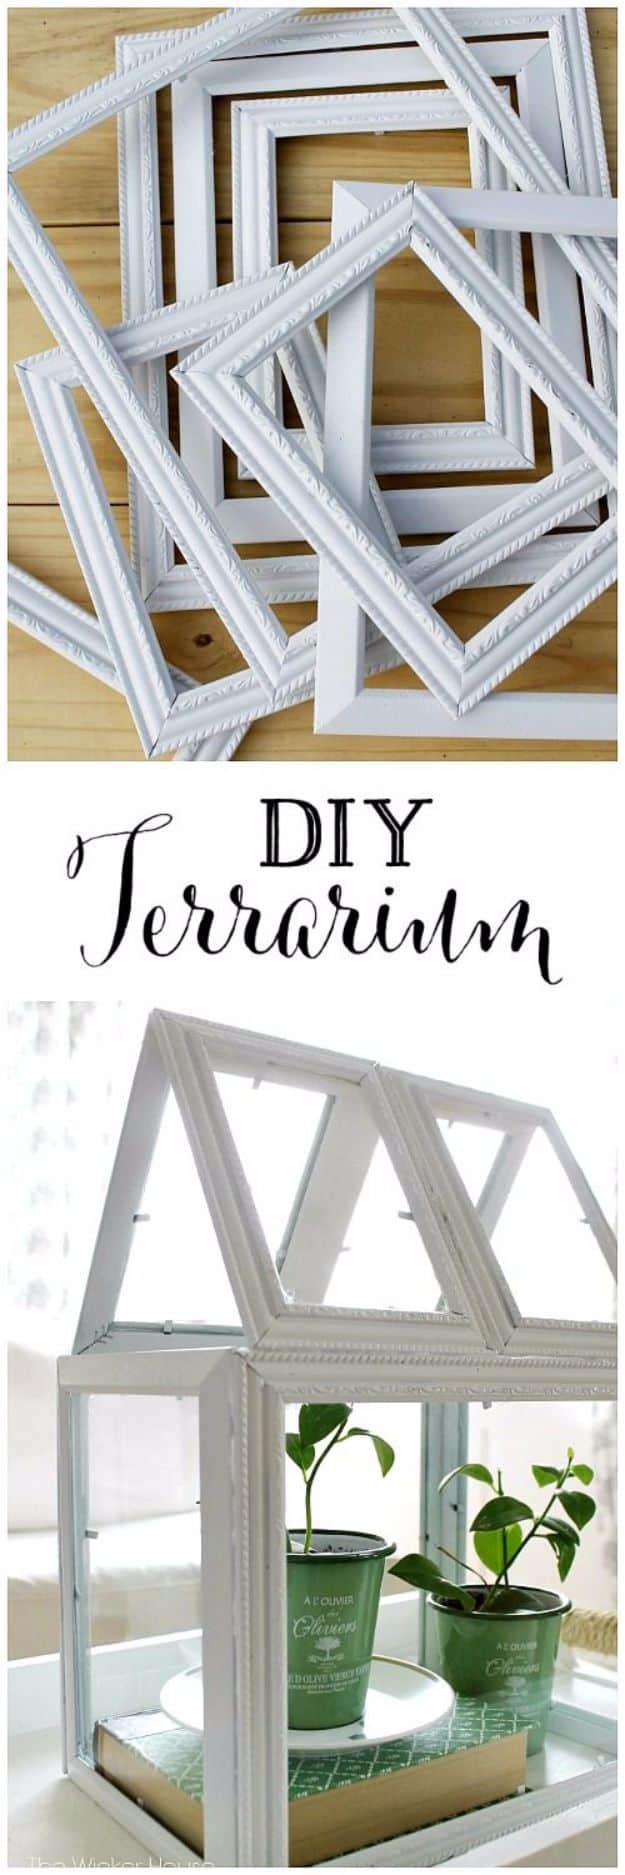 DIY Terrarium Ideas - Picture Frame Greenhouse Terrarium - Cool Terrariums and Crafts With Mason Jars, Succulents, Wood, Geometric Designs and Reptile, Acquarium - Easy DIY Terrariums for Adults and Kids To Make at Home 